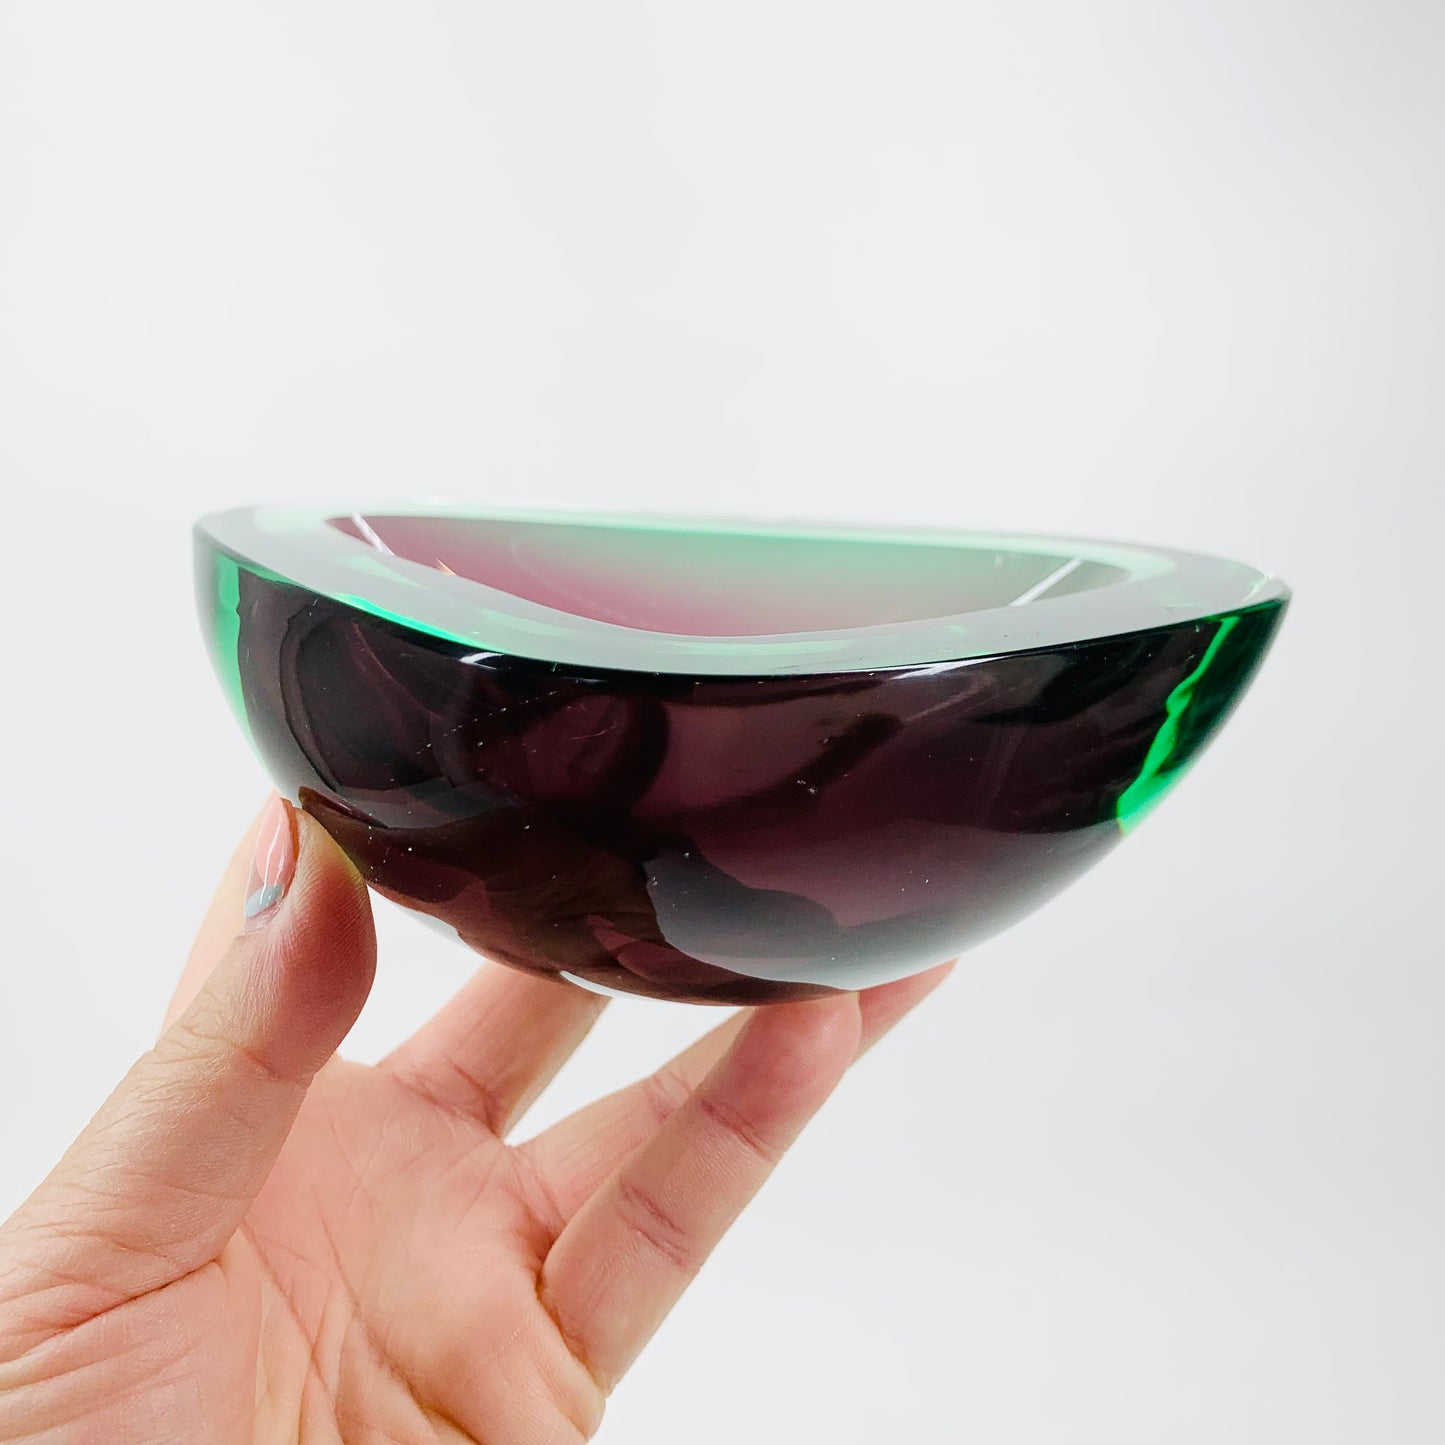 Extremely rare Flavio Poli Murano green & purple sommerso glass geode bowl